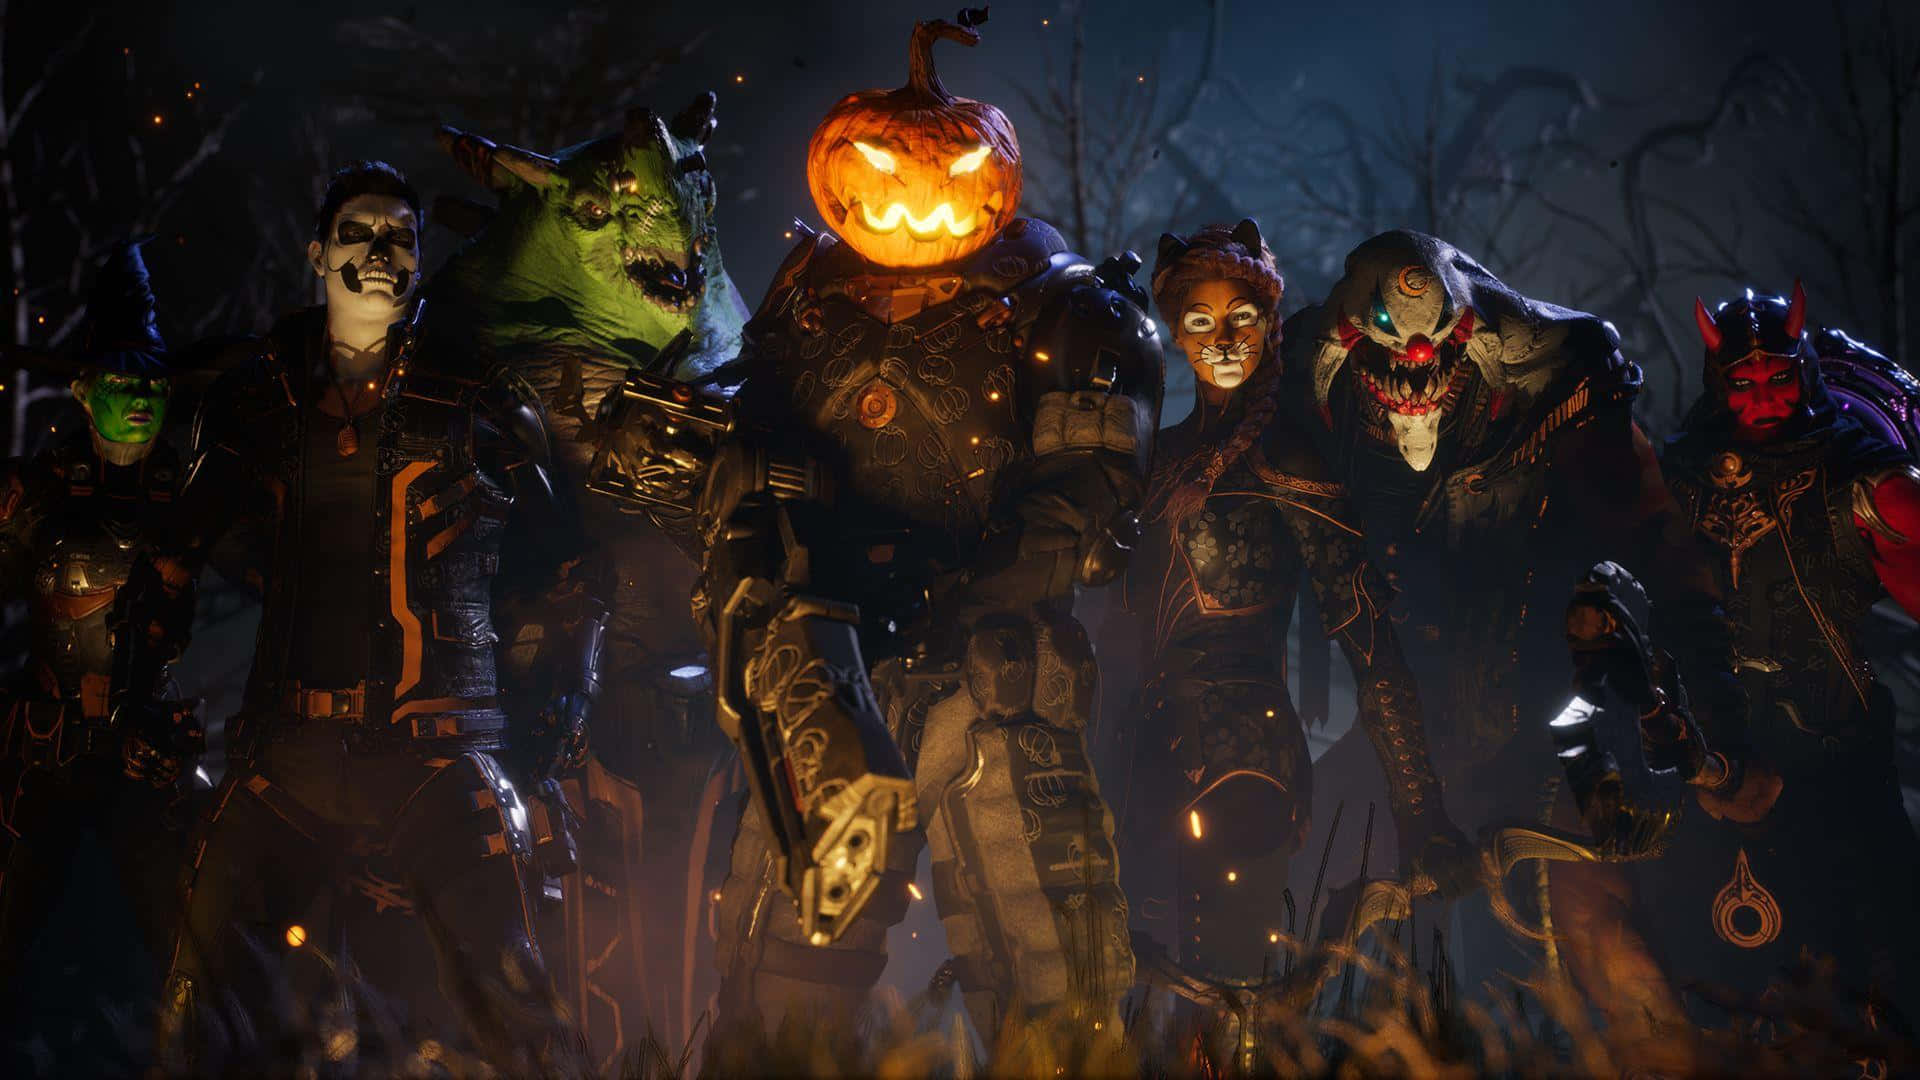 Get scared this Halloween with a horror costume! Wallpaper